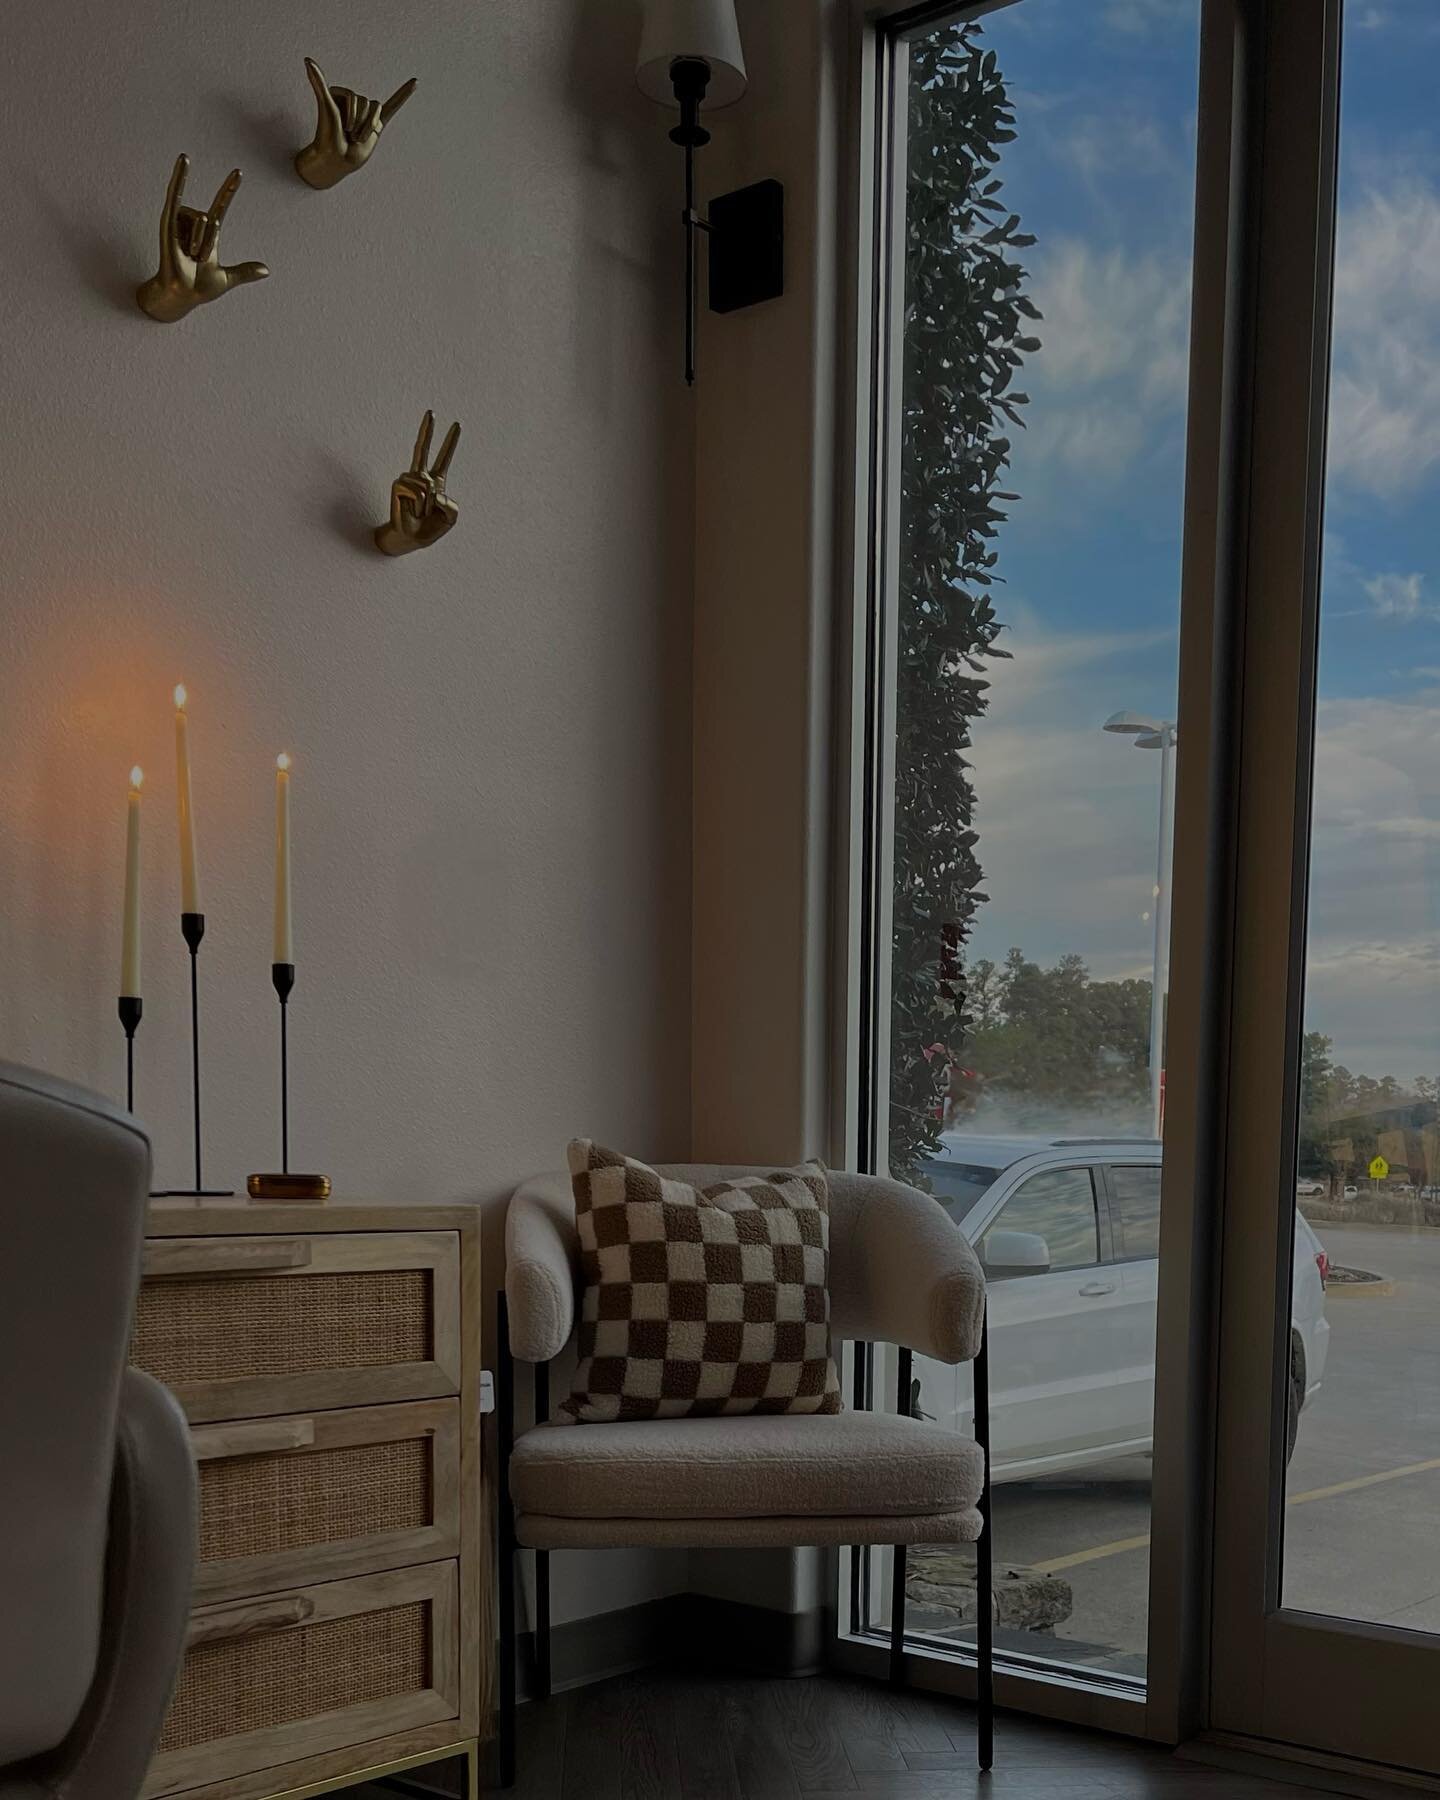 + our cozy little spot just got better. 

+ we are now one door over and our new suite features a little more space and a personal door. clients can now park in the back parking lot and stroll right in to East + Co. 

+ book with us to see what it&rs